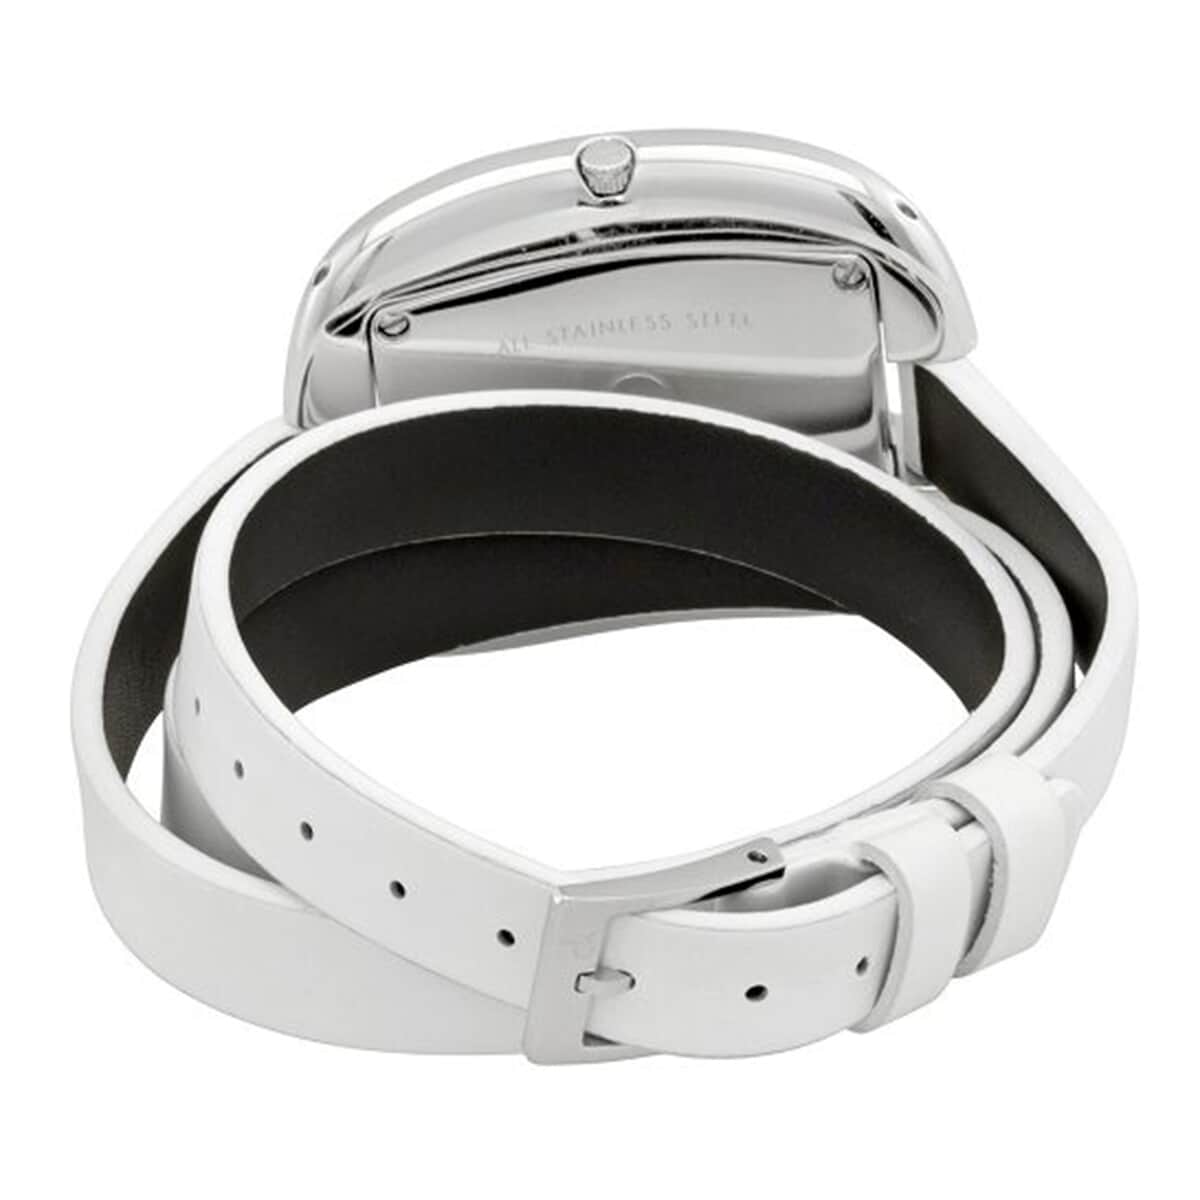 CALVIN KLEIN Treasure Swiss Movement White Genuine Leather Wrap Bracelet Strap Watch in Stainless Steel (41mm) image number 2